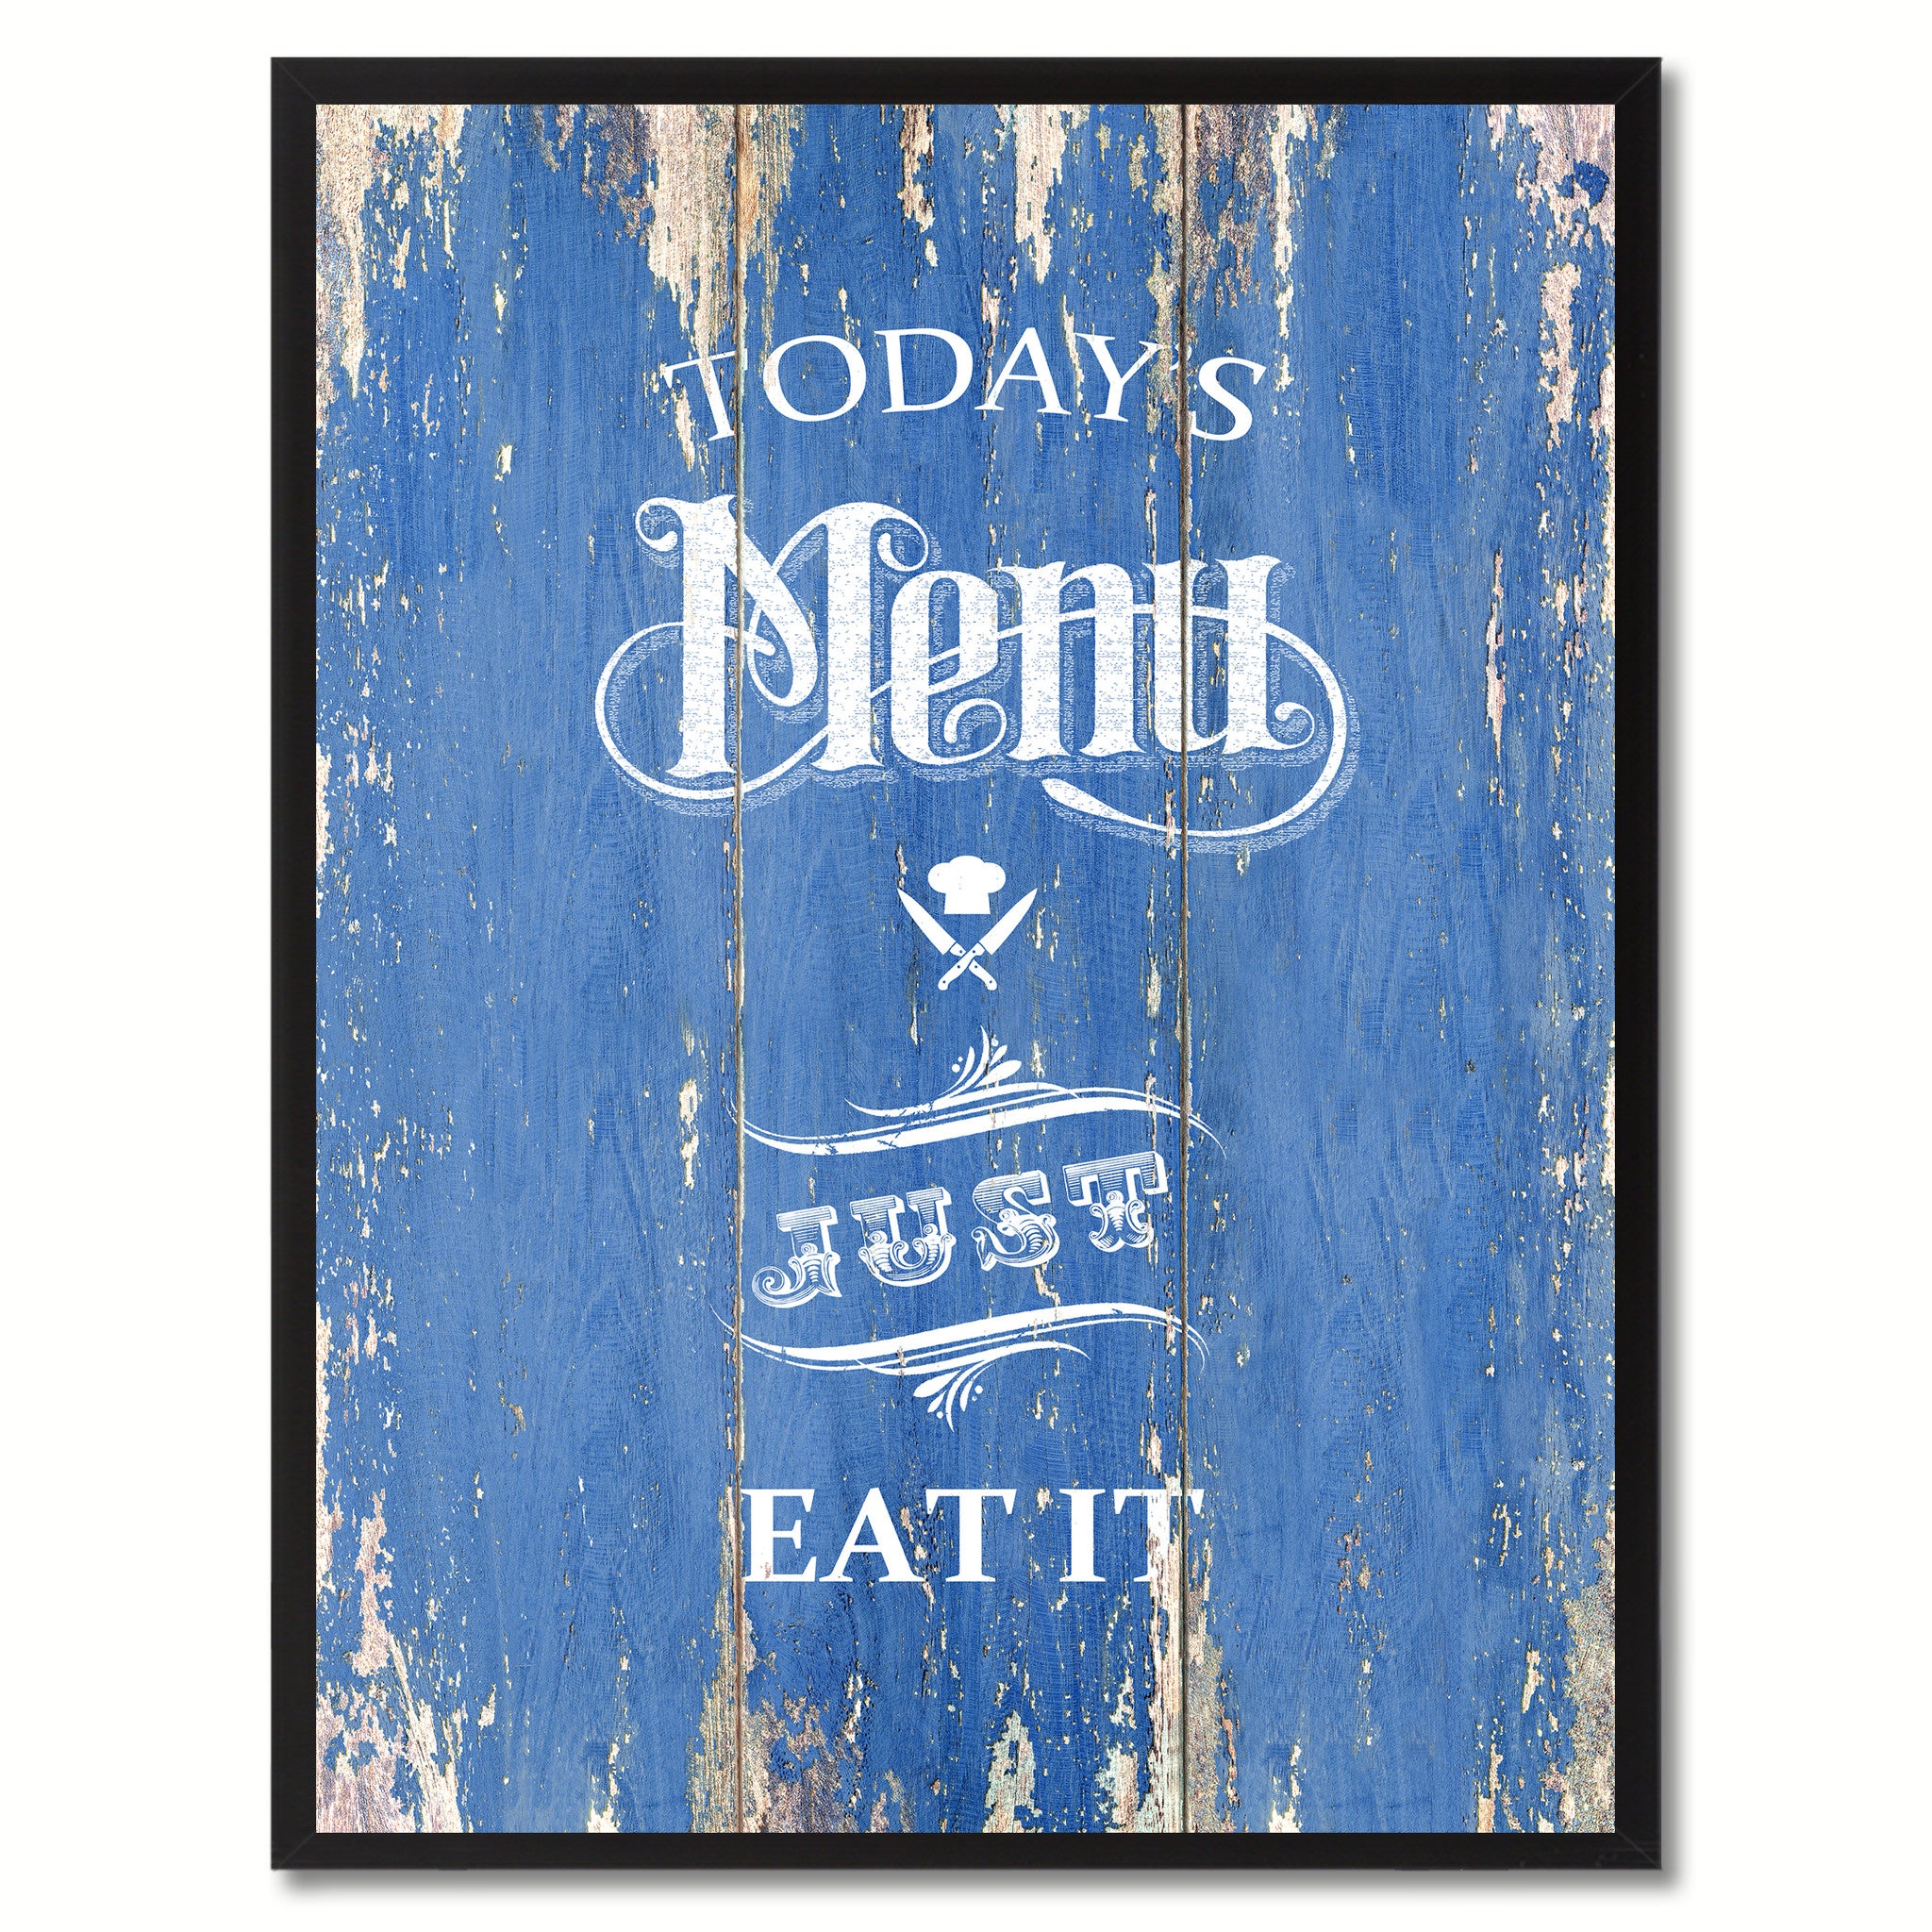 Today's menu just eat it Quote Saying Canvas Print with Picture Frame Home Decor Wall Art, Blue